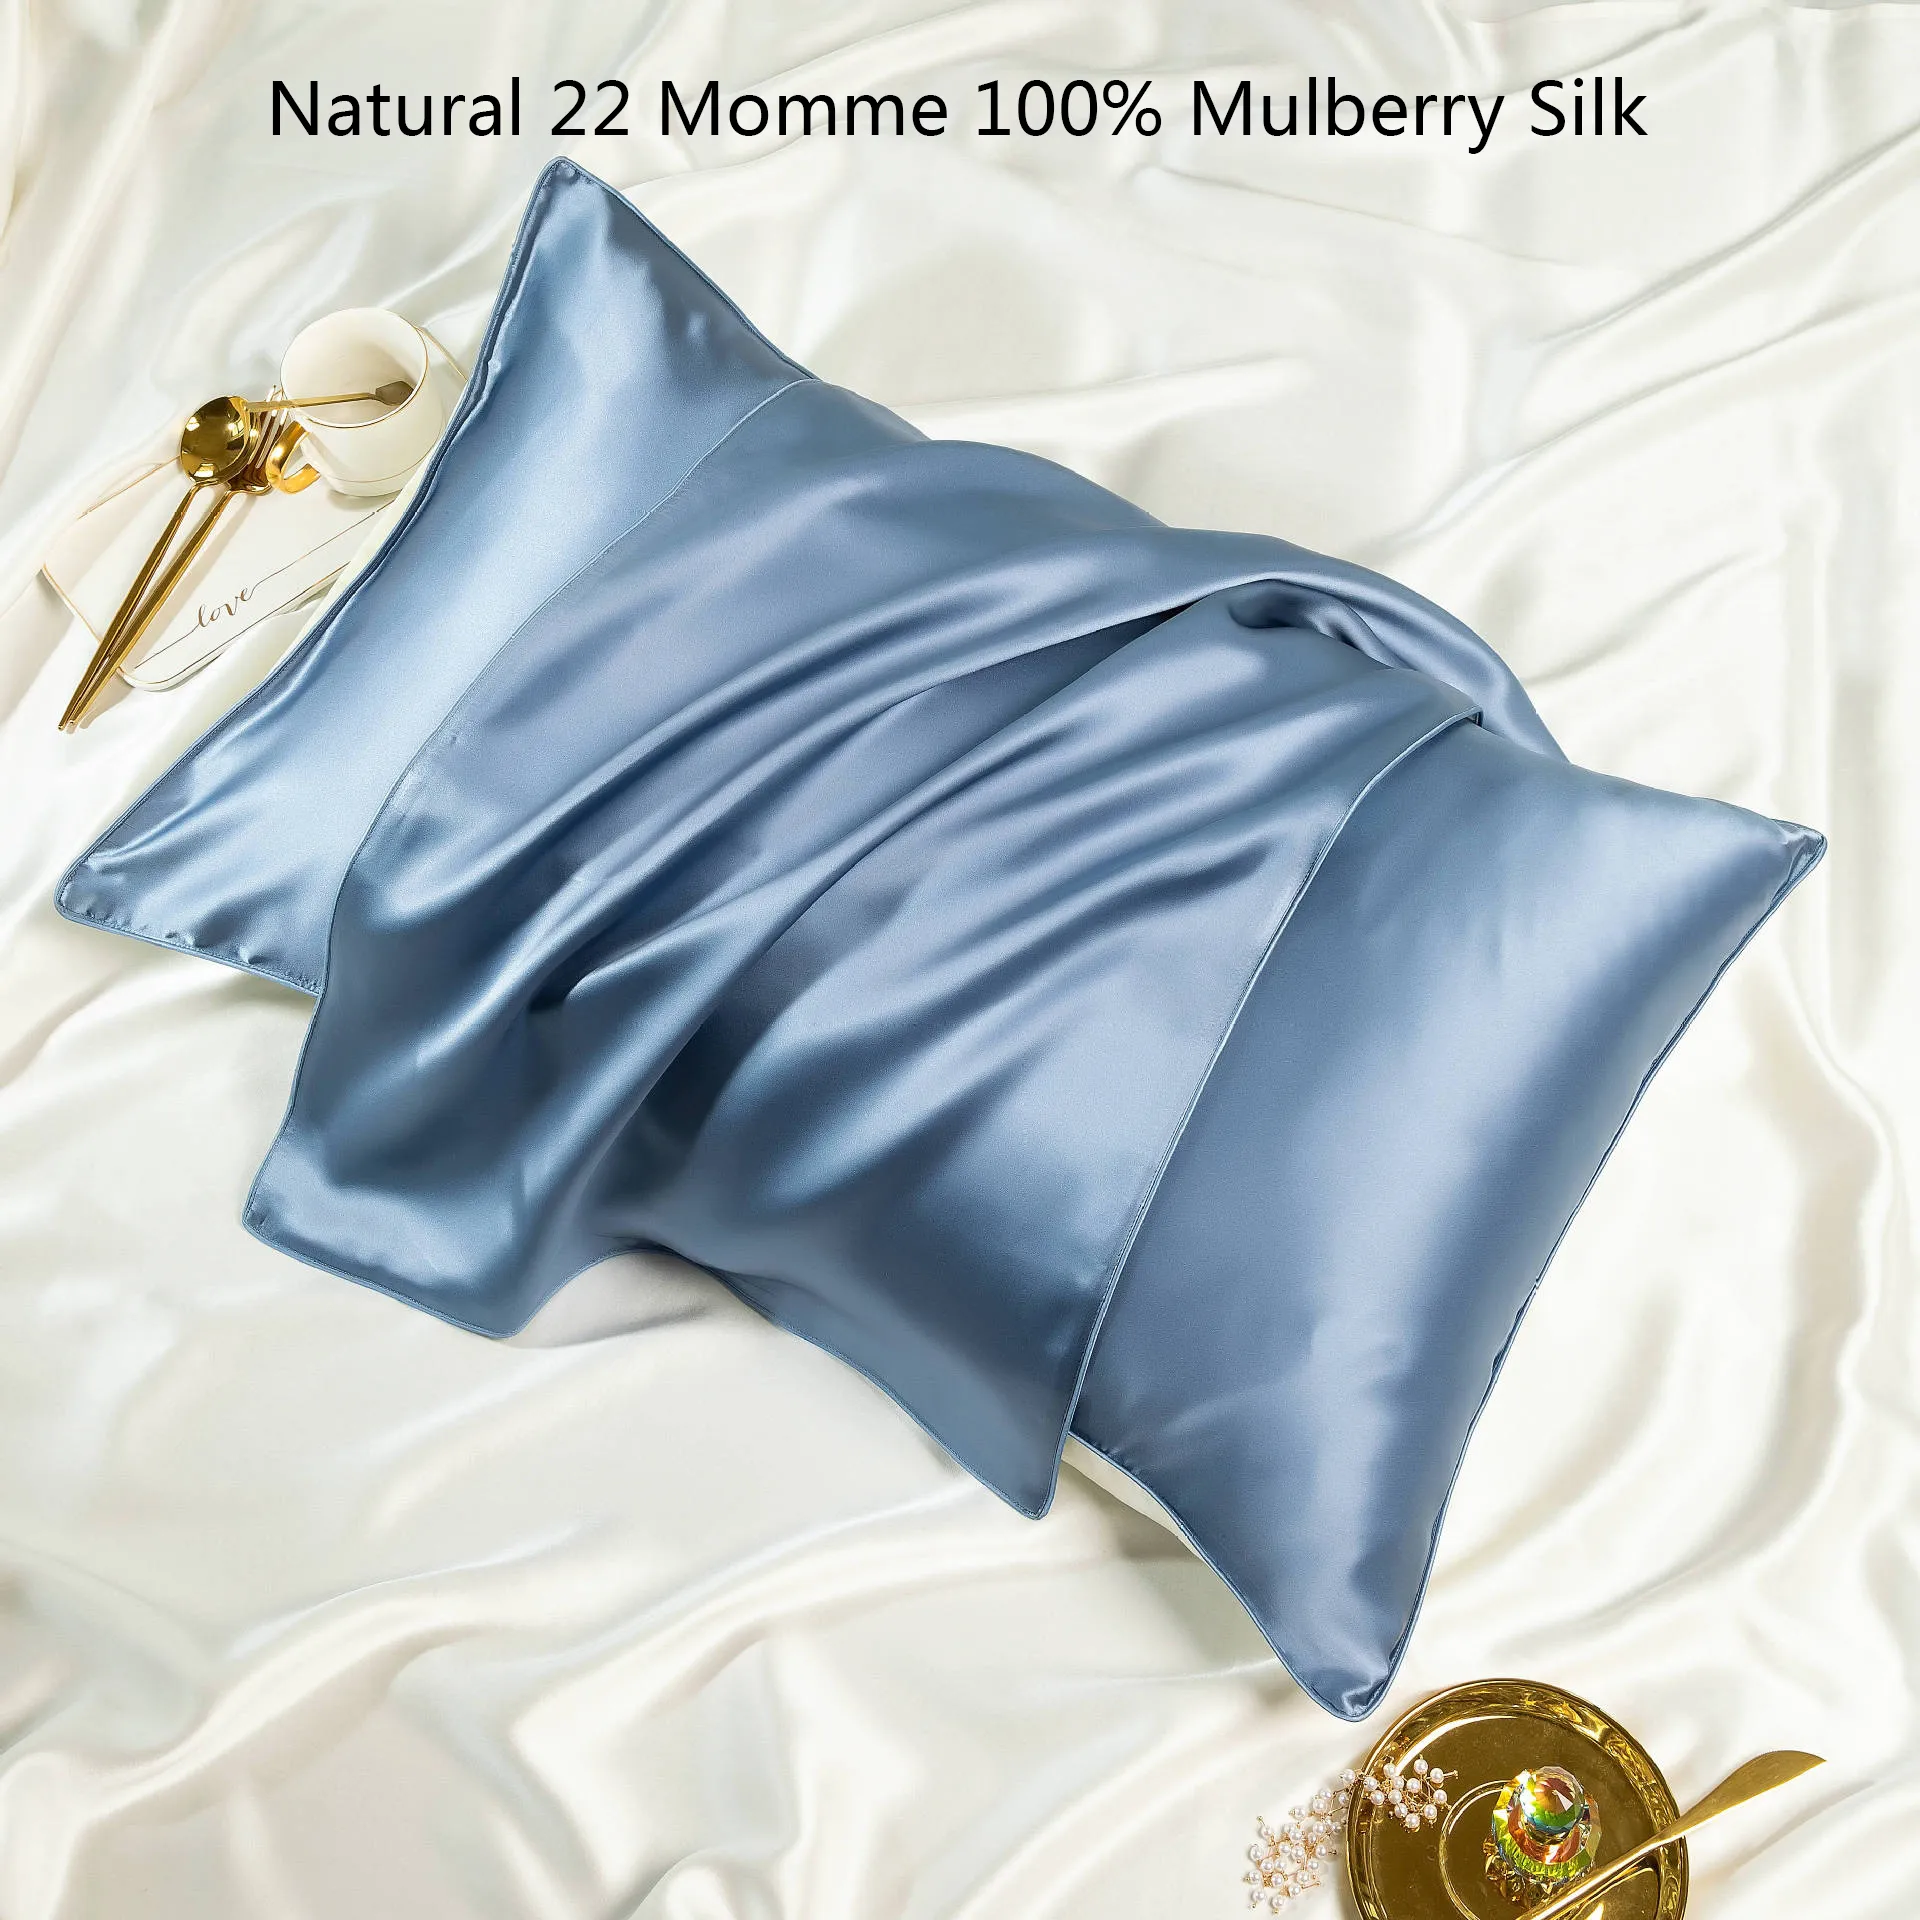 Natural 22 Momme 100% Mulberry Silk Pure Real Silk pillowcase Pillow Case